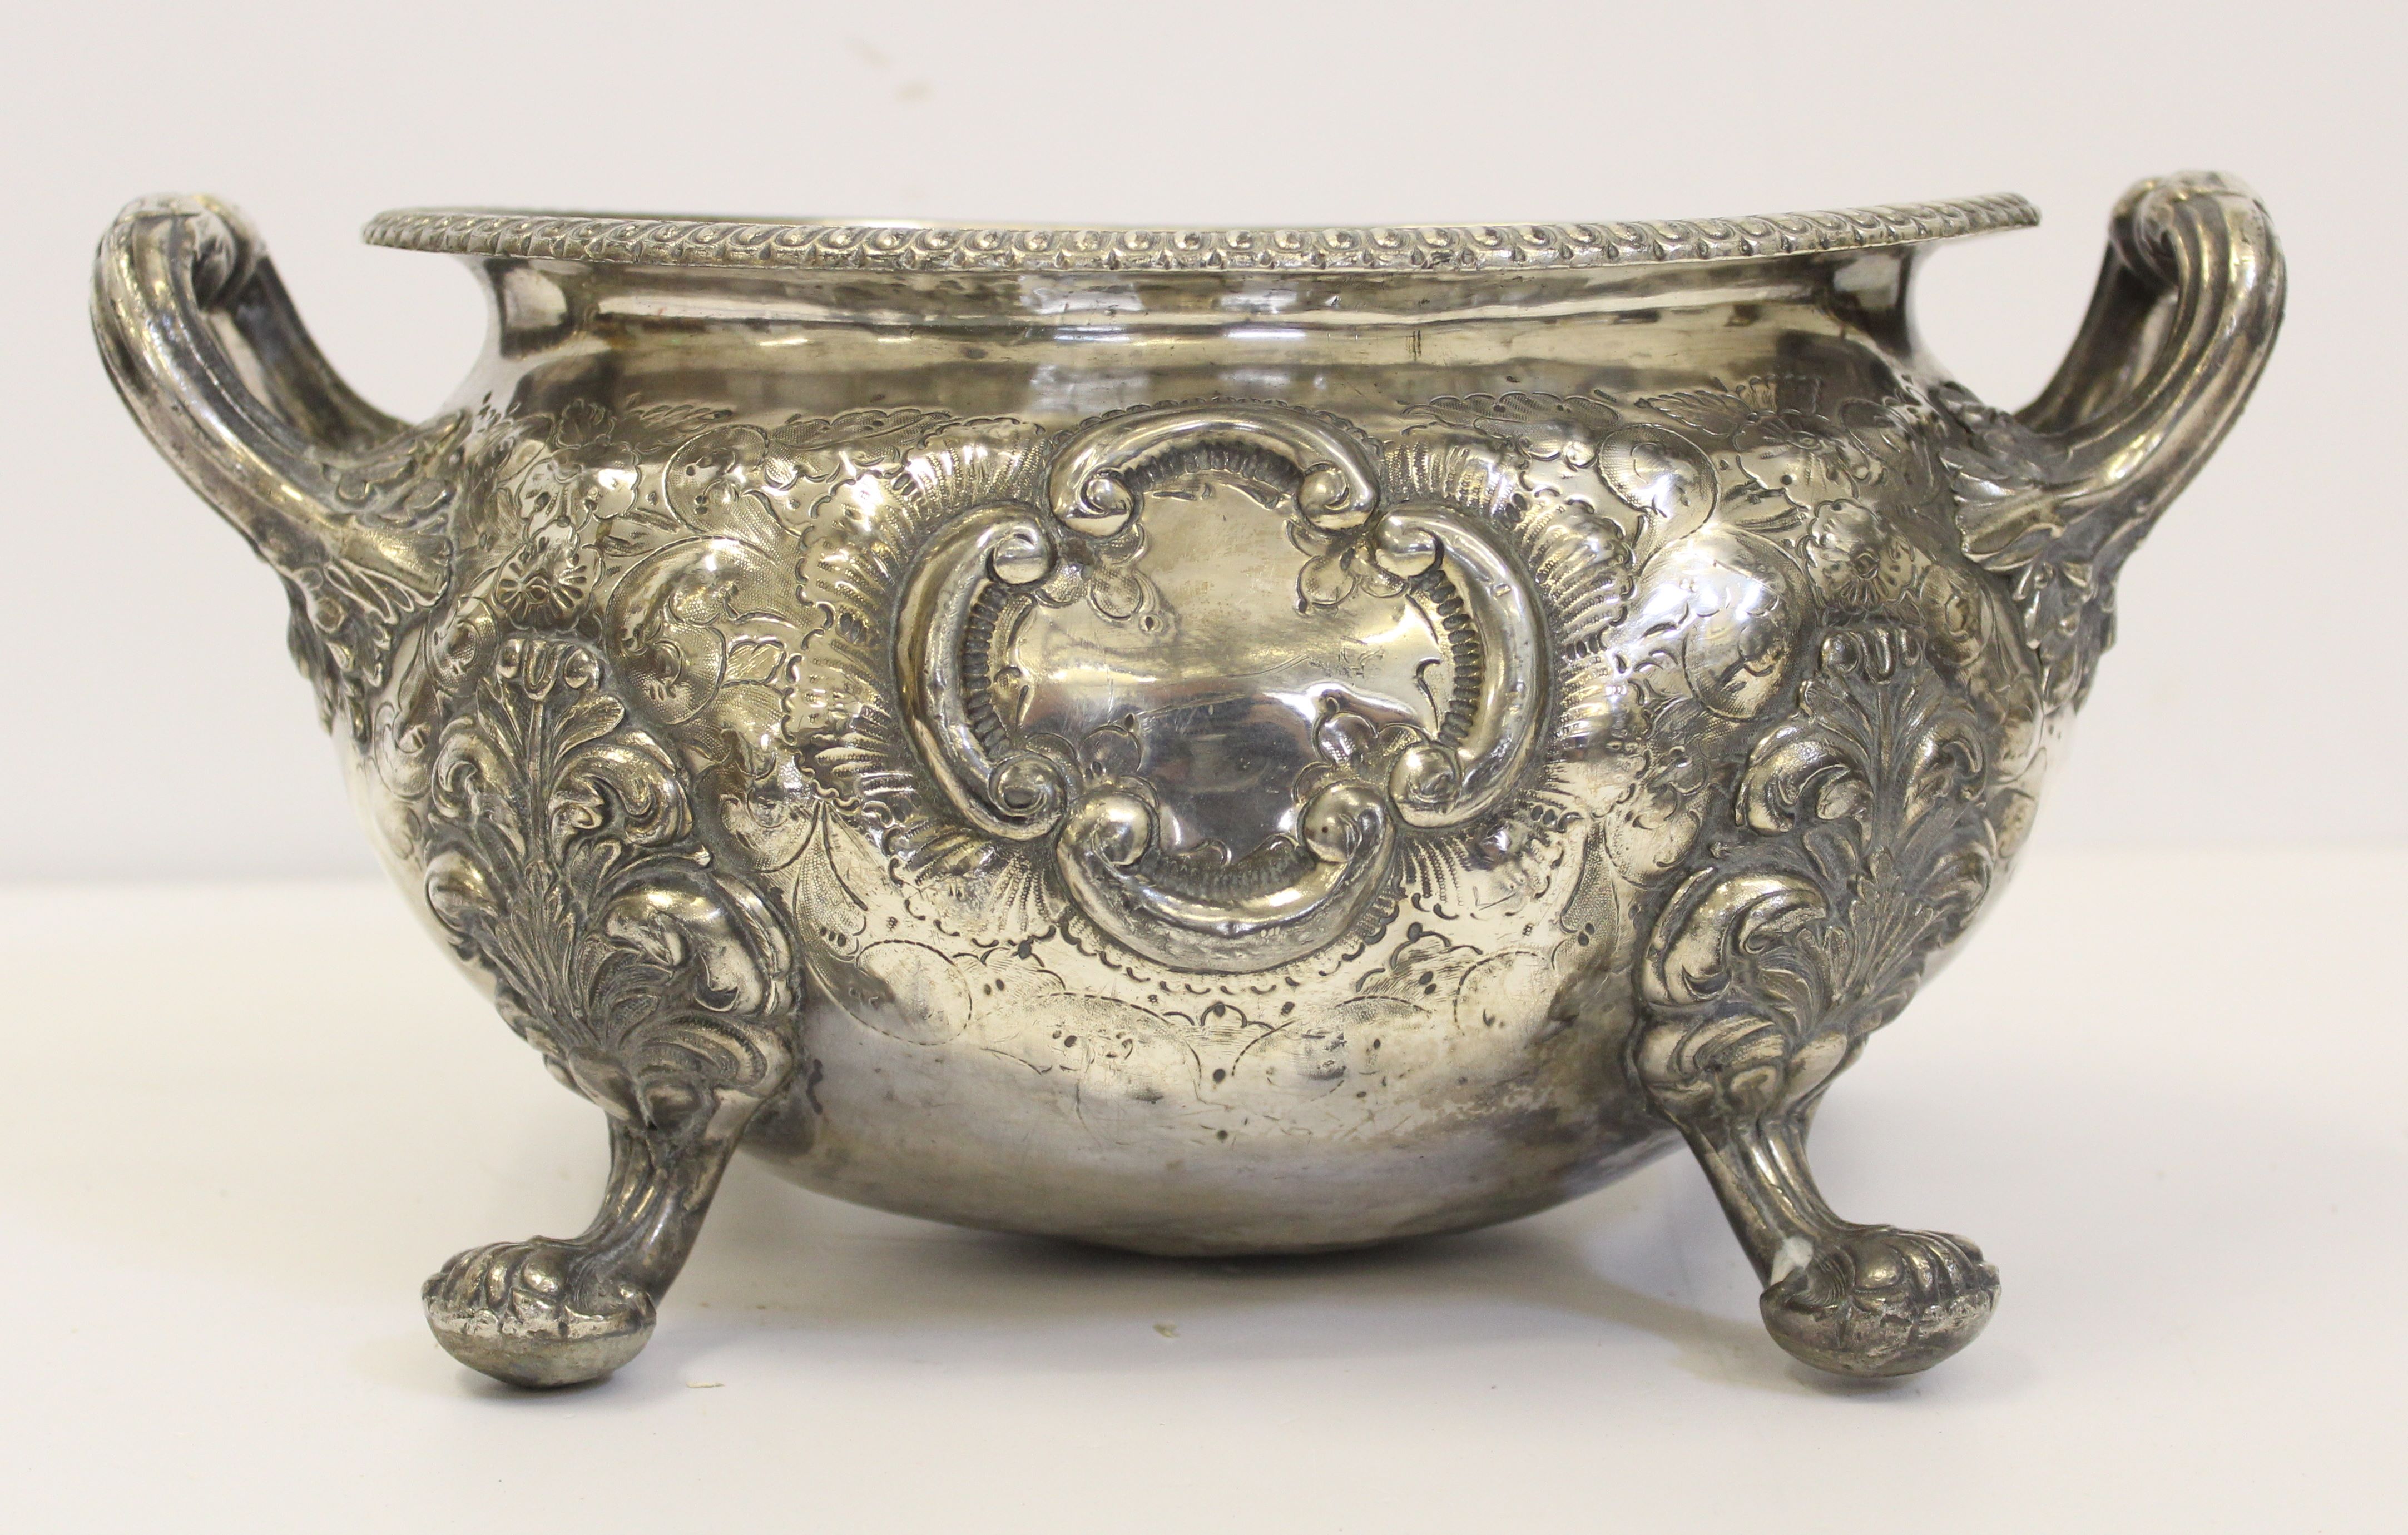 A silver plated oval footed jardinière or tureen, on four paw feet with high loop handles